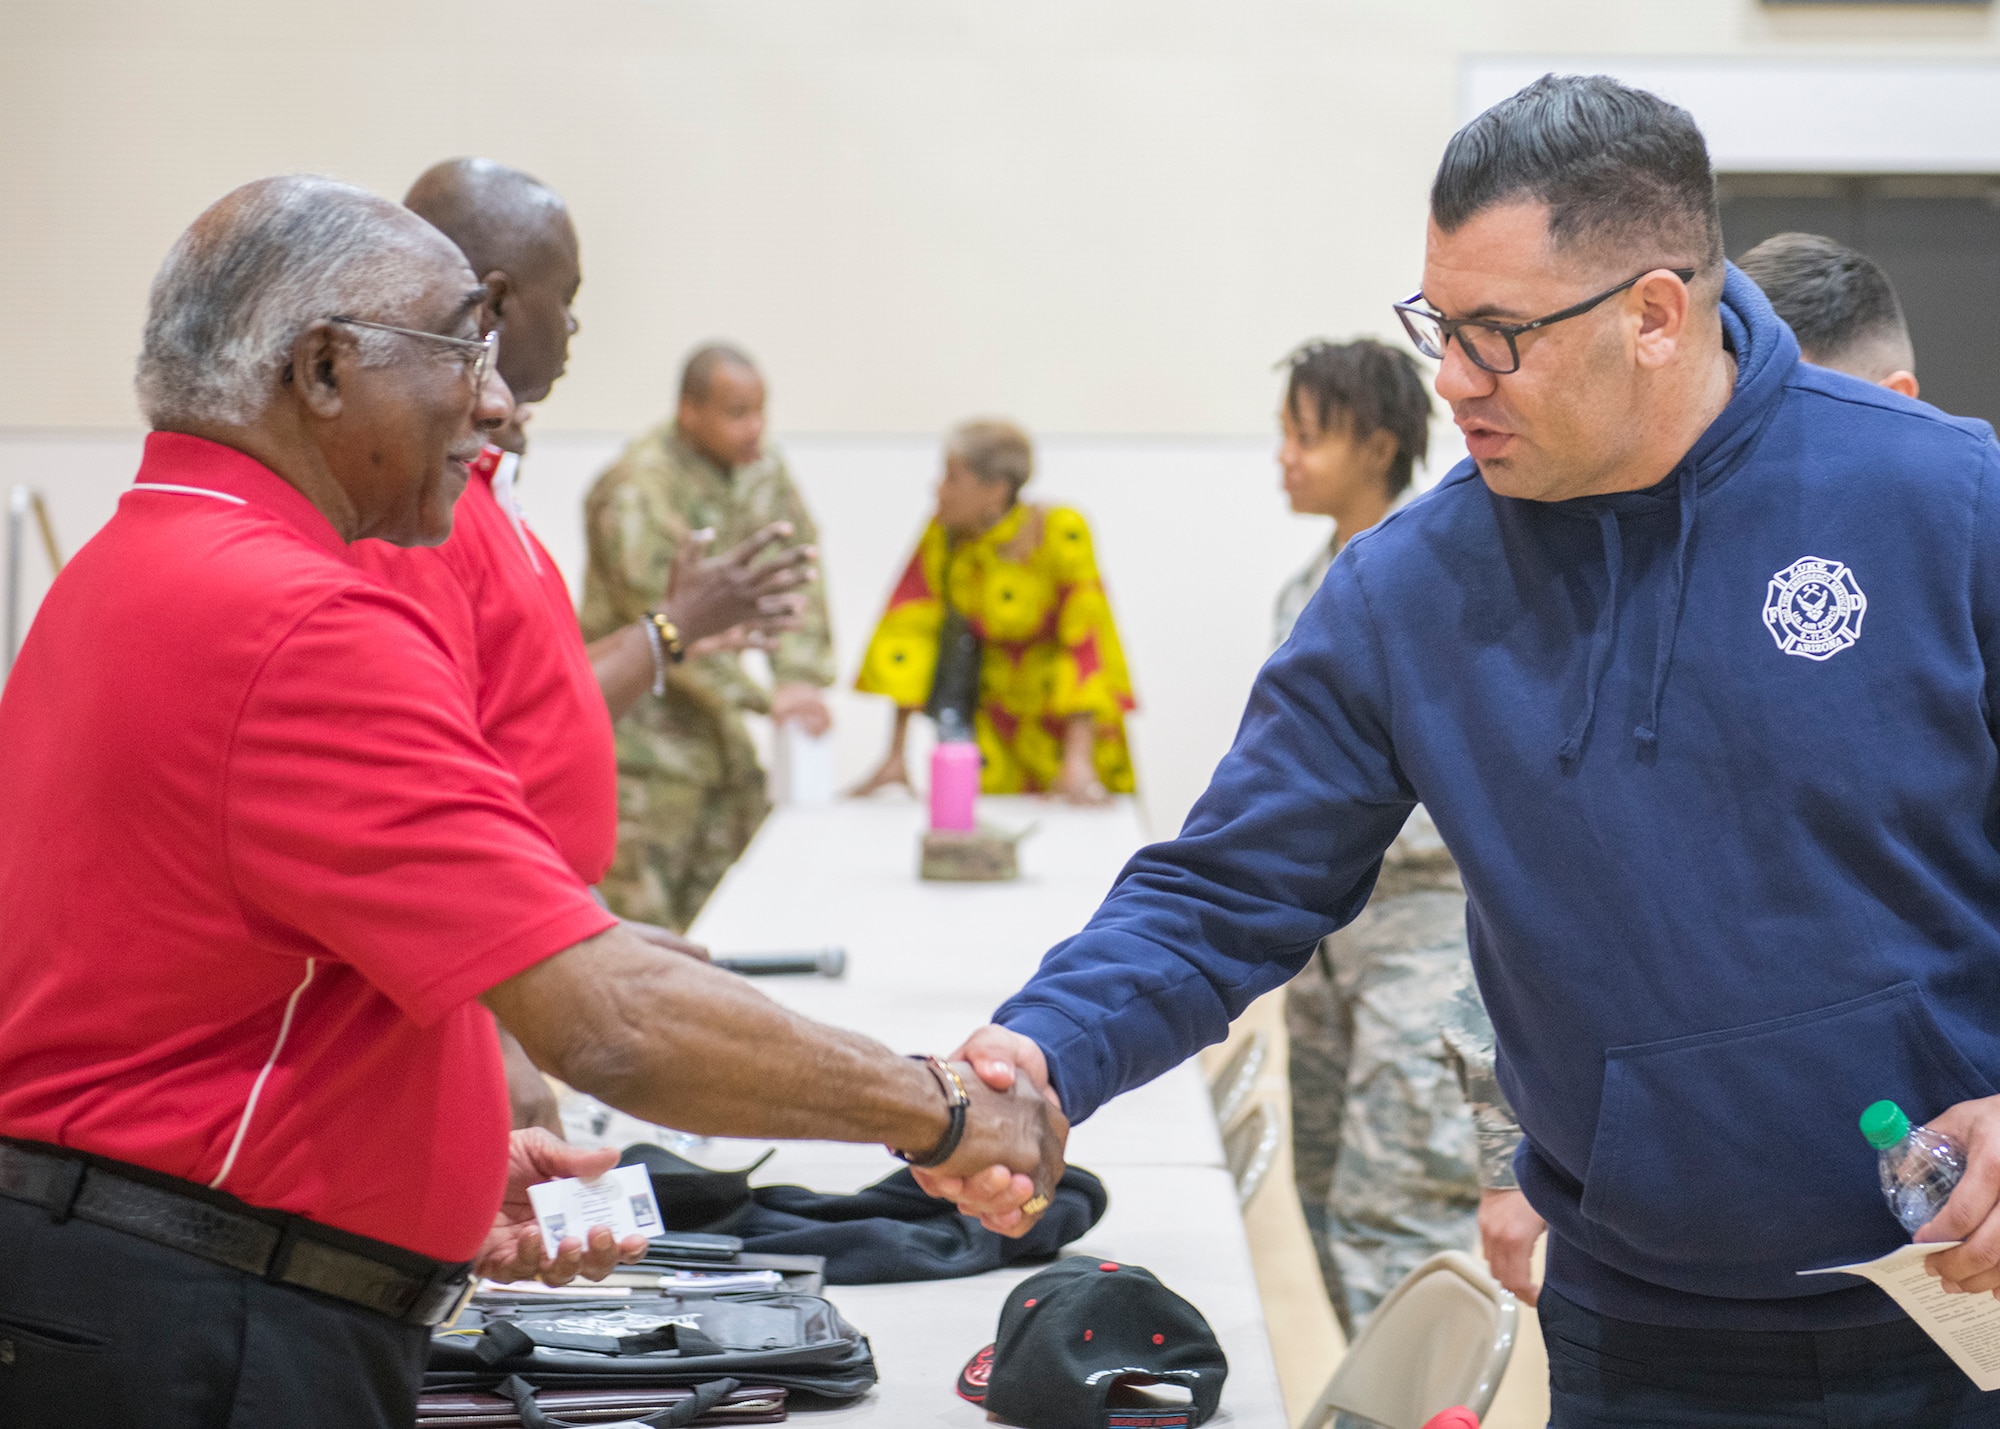 Retired U.S. Air Force Col. Richard Toliver, member of the Archer-Ragsdale Arizona chapter of Tuskegee Airmen Incorporated, shakes Tracy McGregor’s hand, 56th Civil Engineer Squadron fire and emergency services, after a Black History Month panel discussion Feb. 27, 2020, at Luke Air Force Base, Ariz.